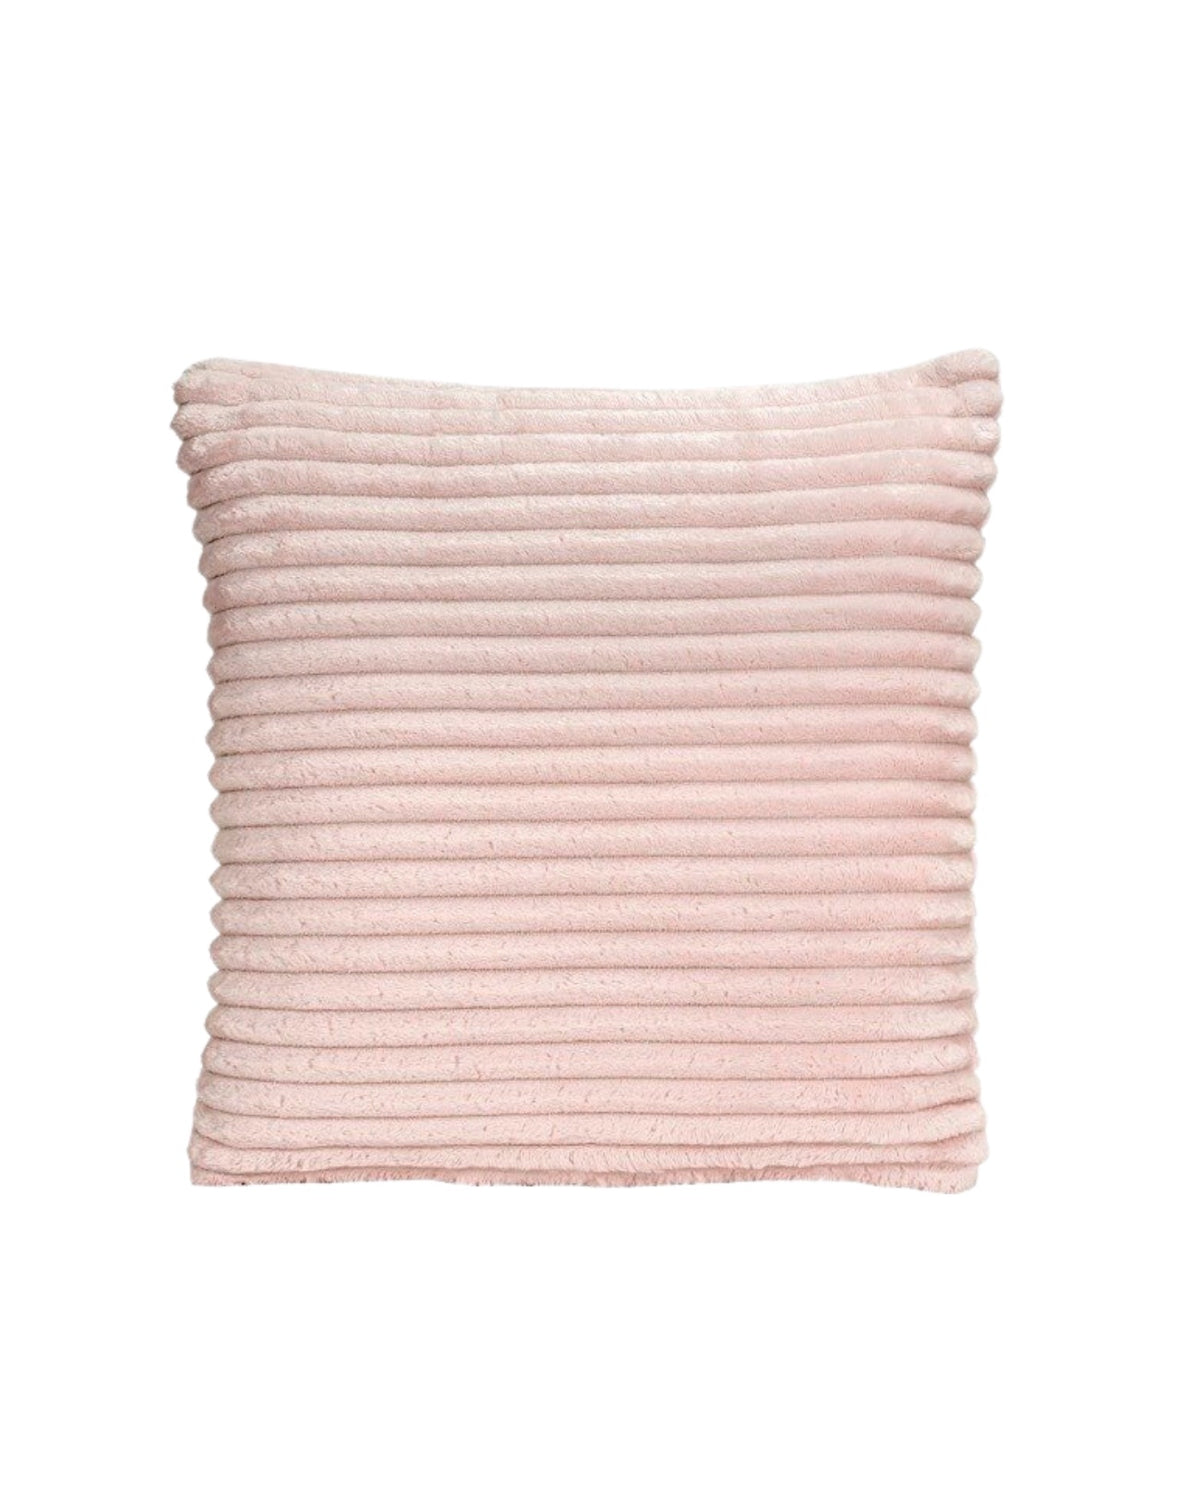 The velvet ribbed  cushion is incredibly soft and plush This plain-coloured cushion features a velour stripe pattern on both sides that creates a beautiful soft texture, perfect for a kids bed. Includes synthetic cushion fill.  50x50cm 